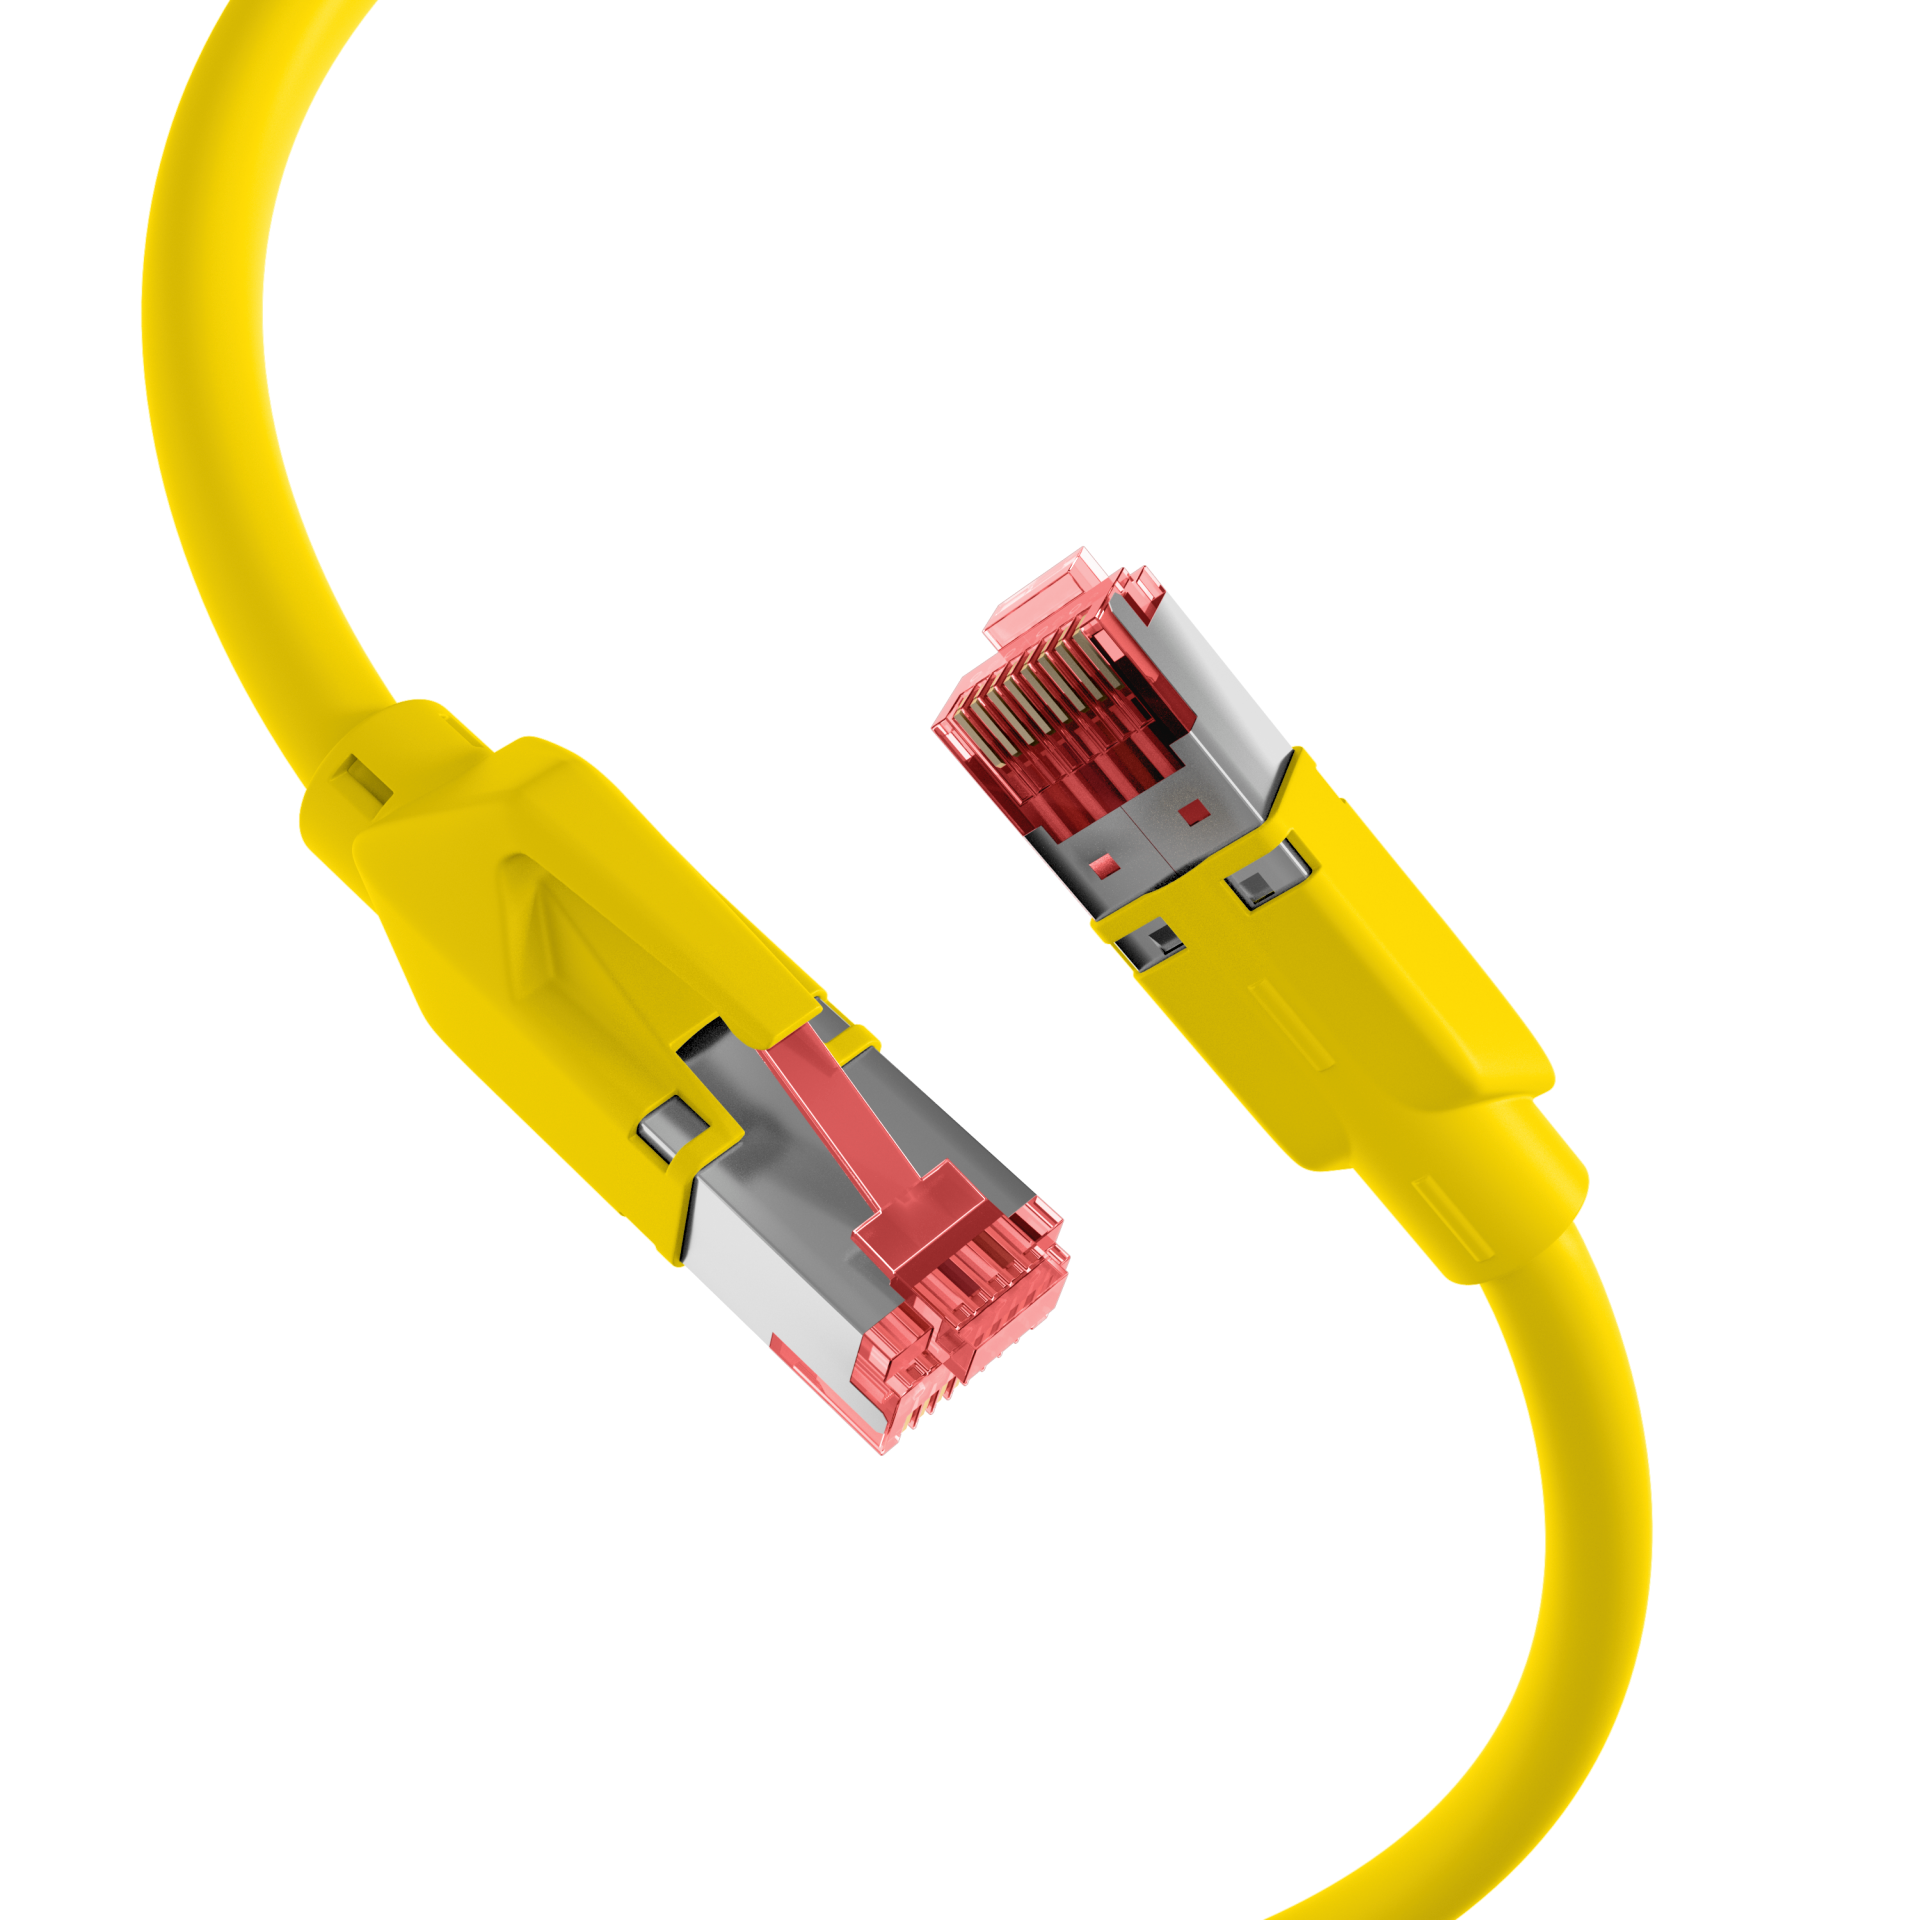 RJ45 Patch Cord Cat.5e S/UTP PUR TM21 for drag chains yellow 3m